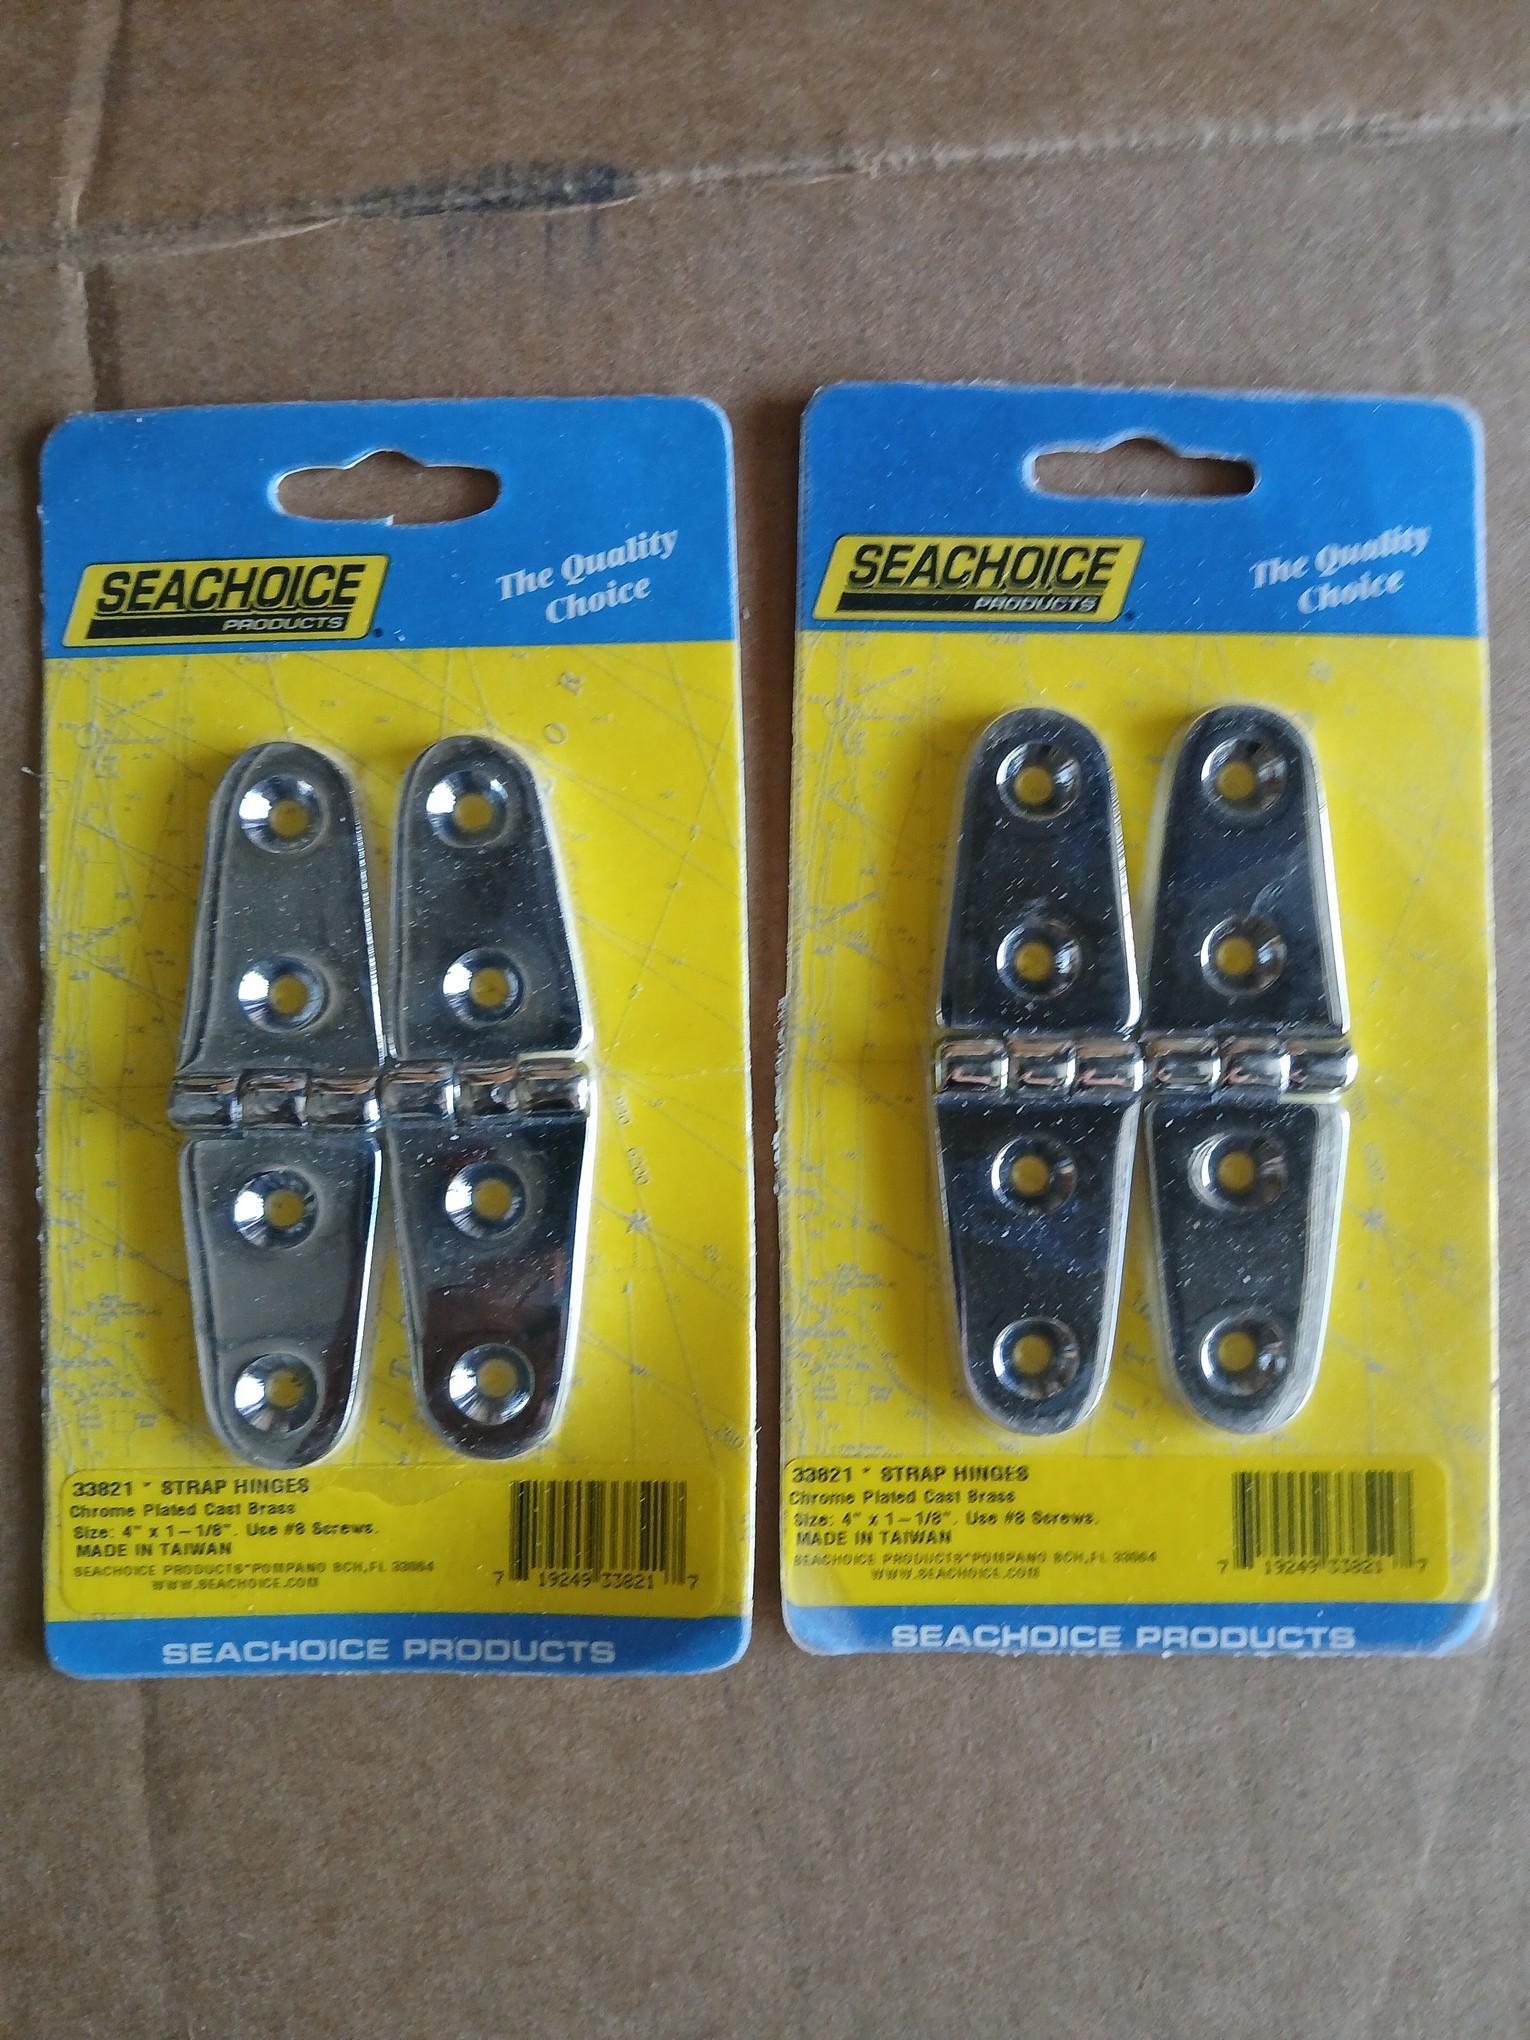 SEACHOICE PRODUCTS # 33951 Butt Hinges W/ Base / Boating Hing